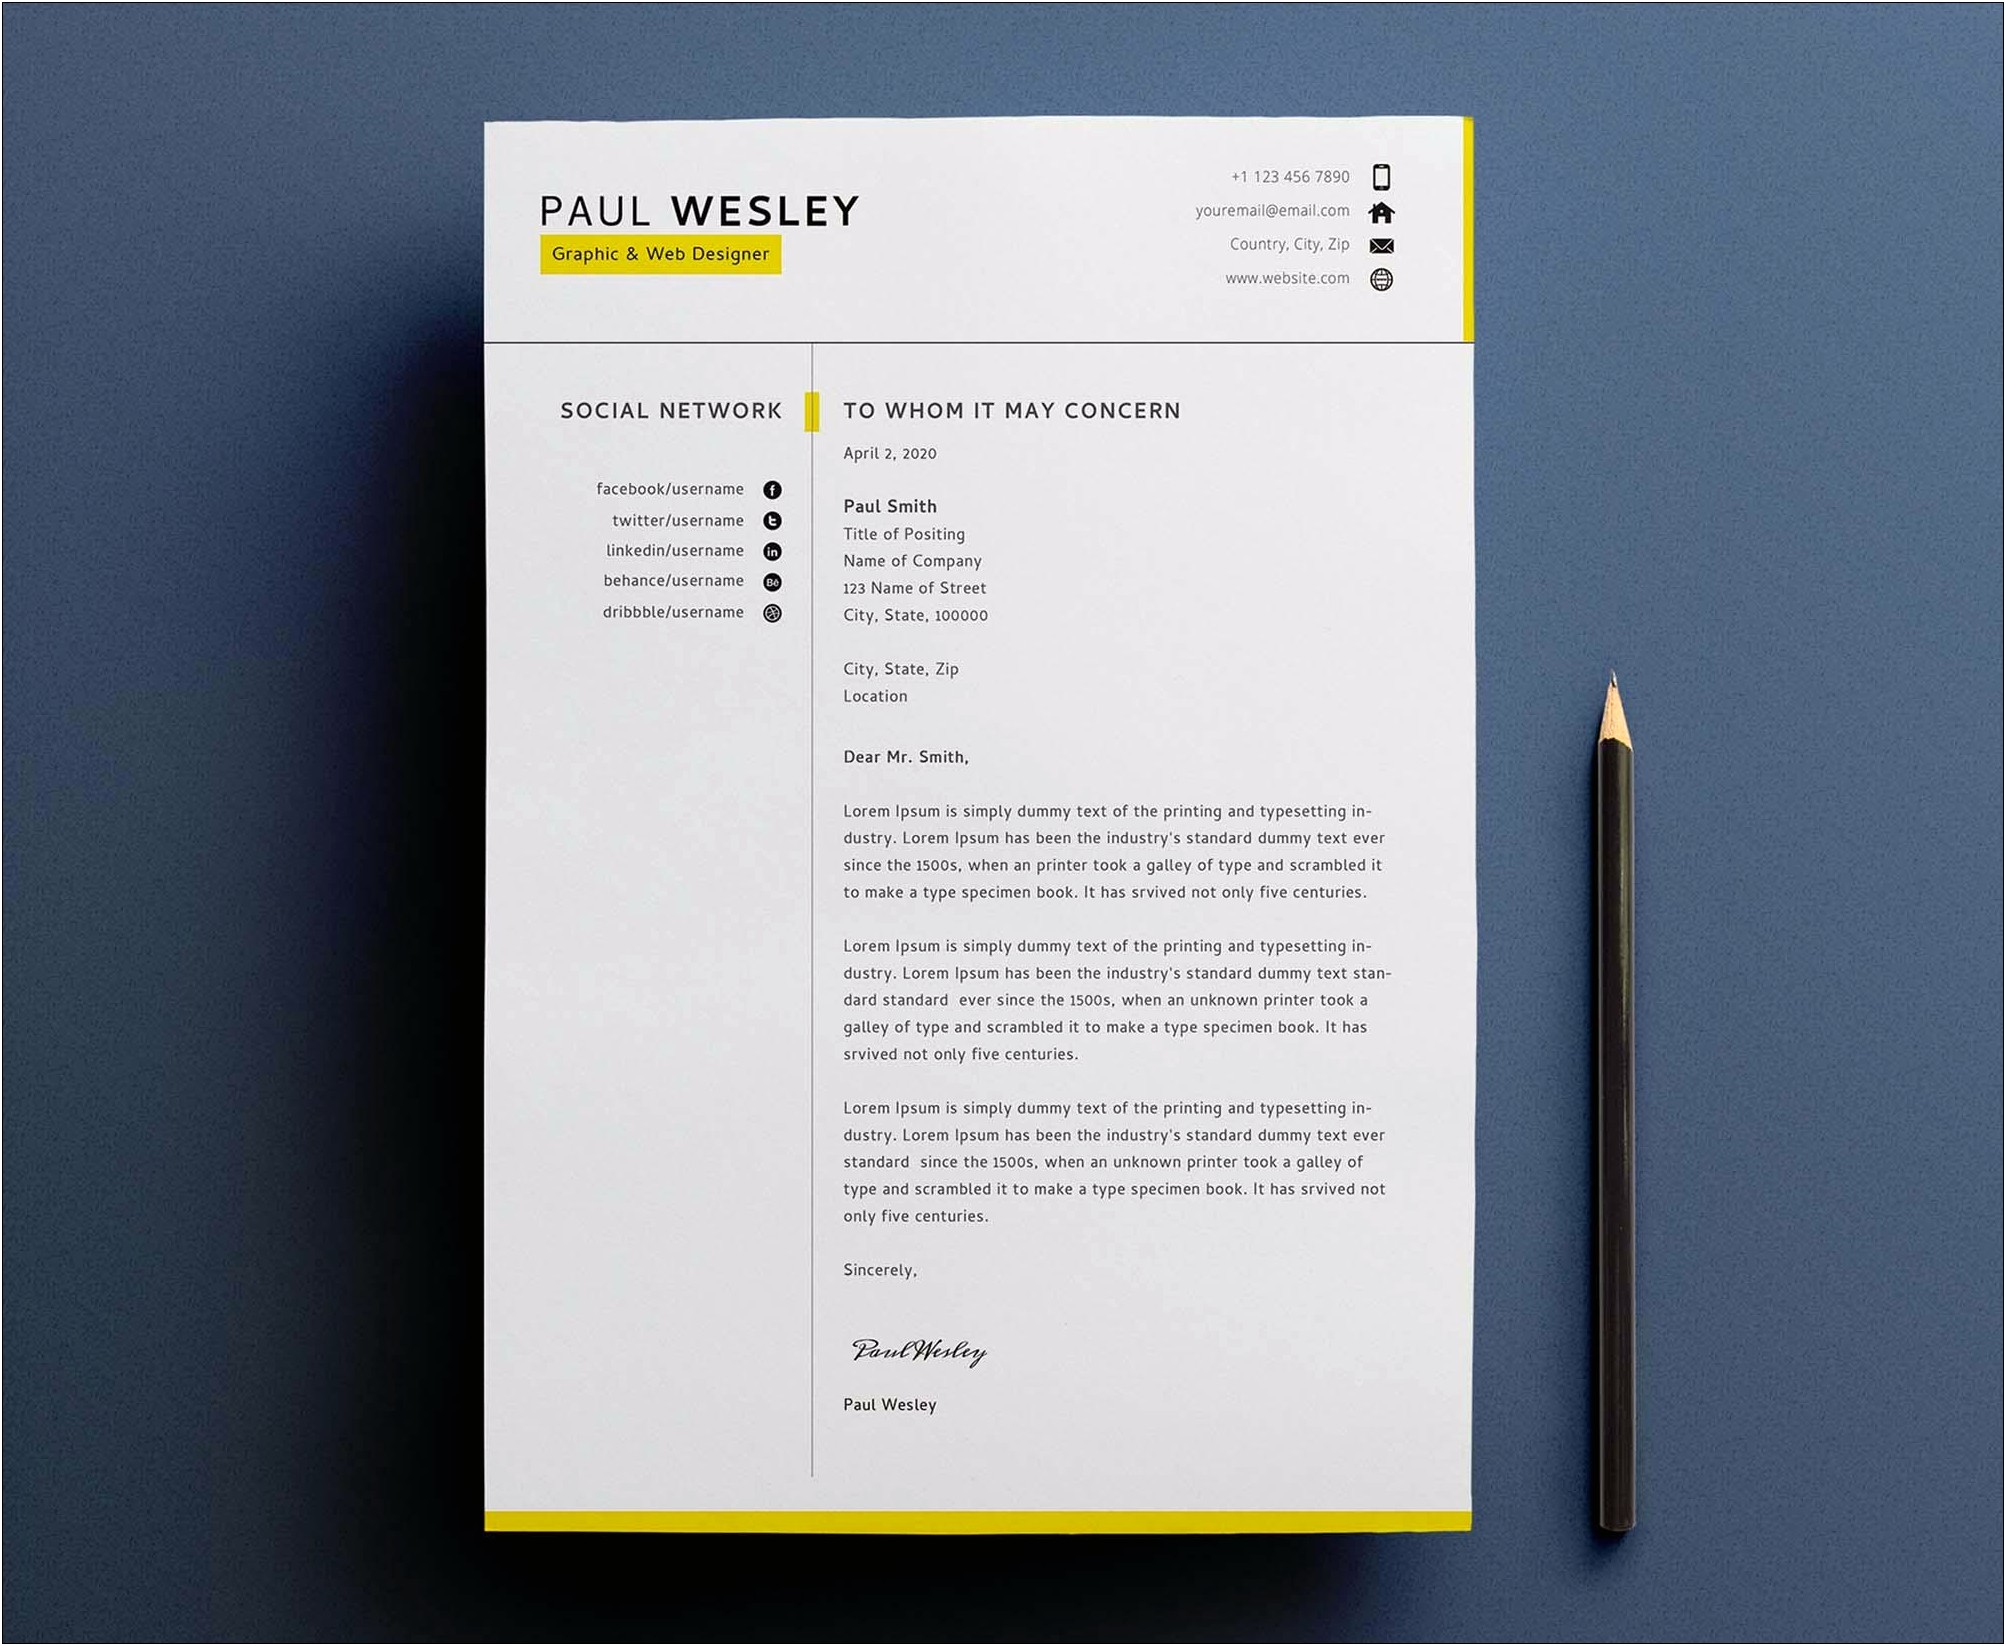 Best Place To Find Free Resume Template